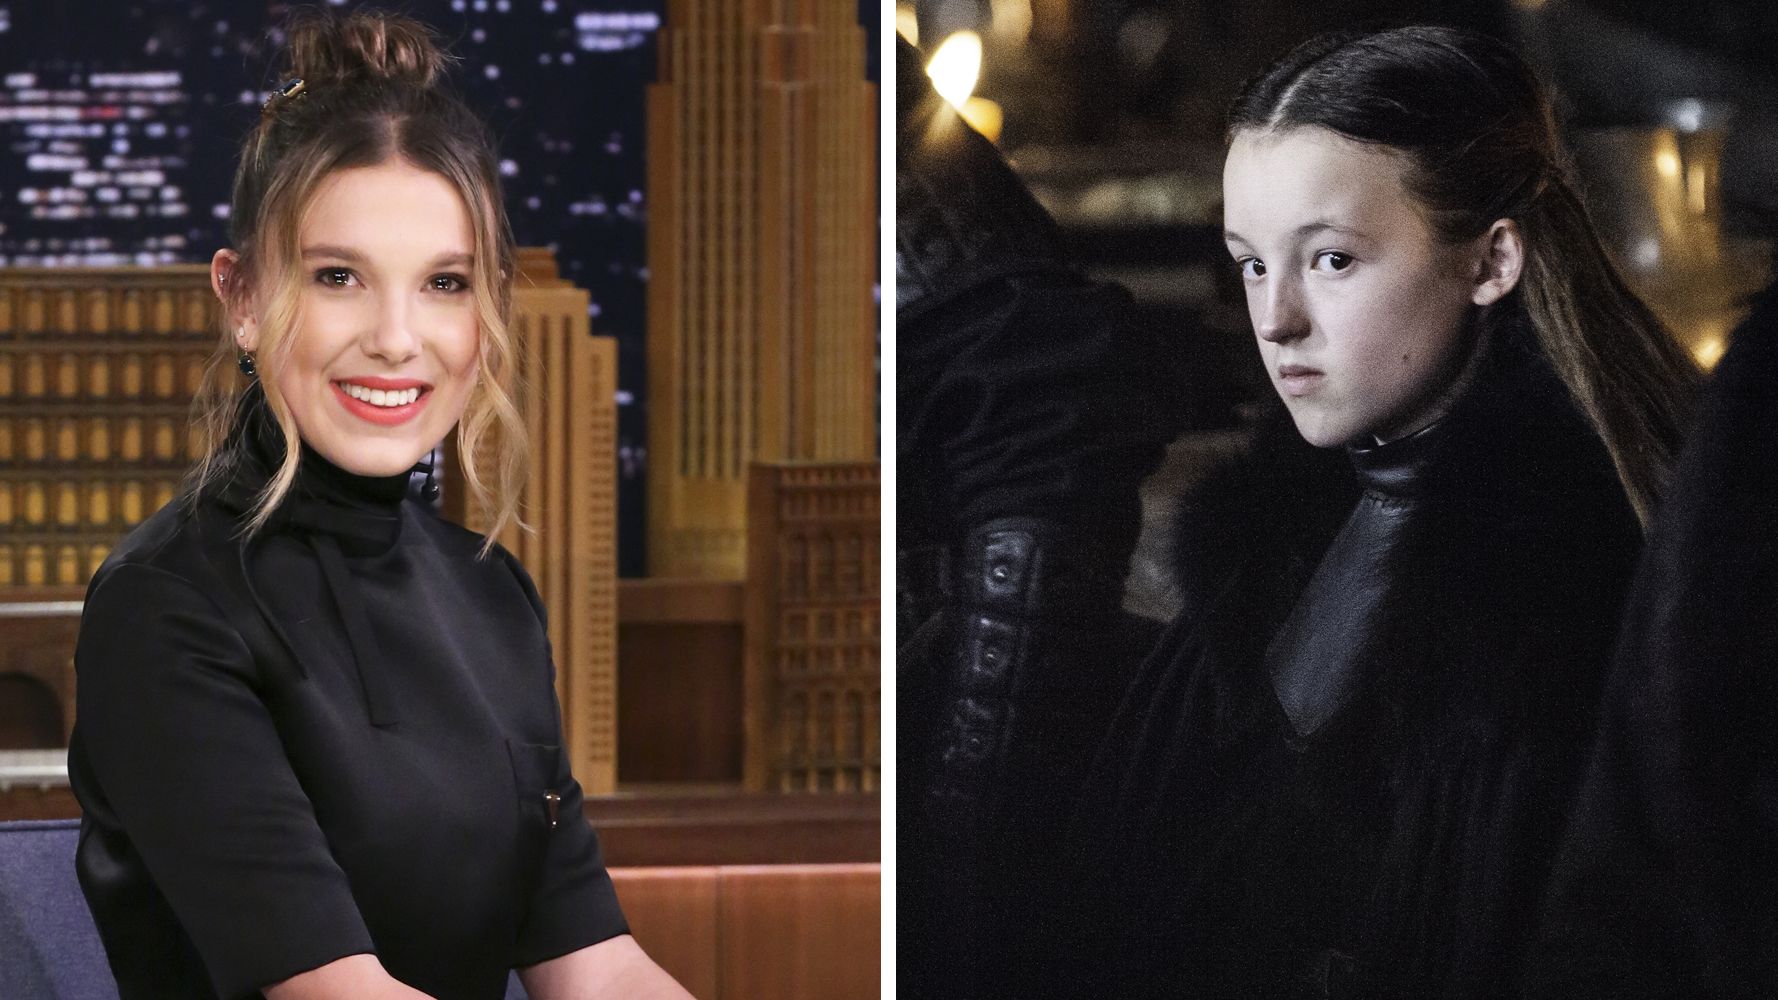 Millie Bobby Brown's 10 best outfits